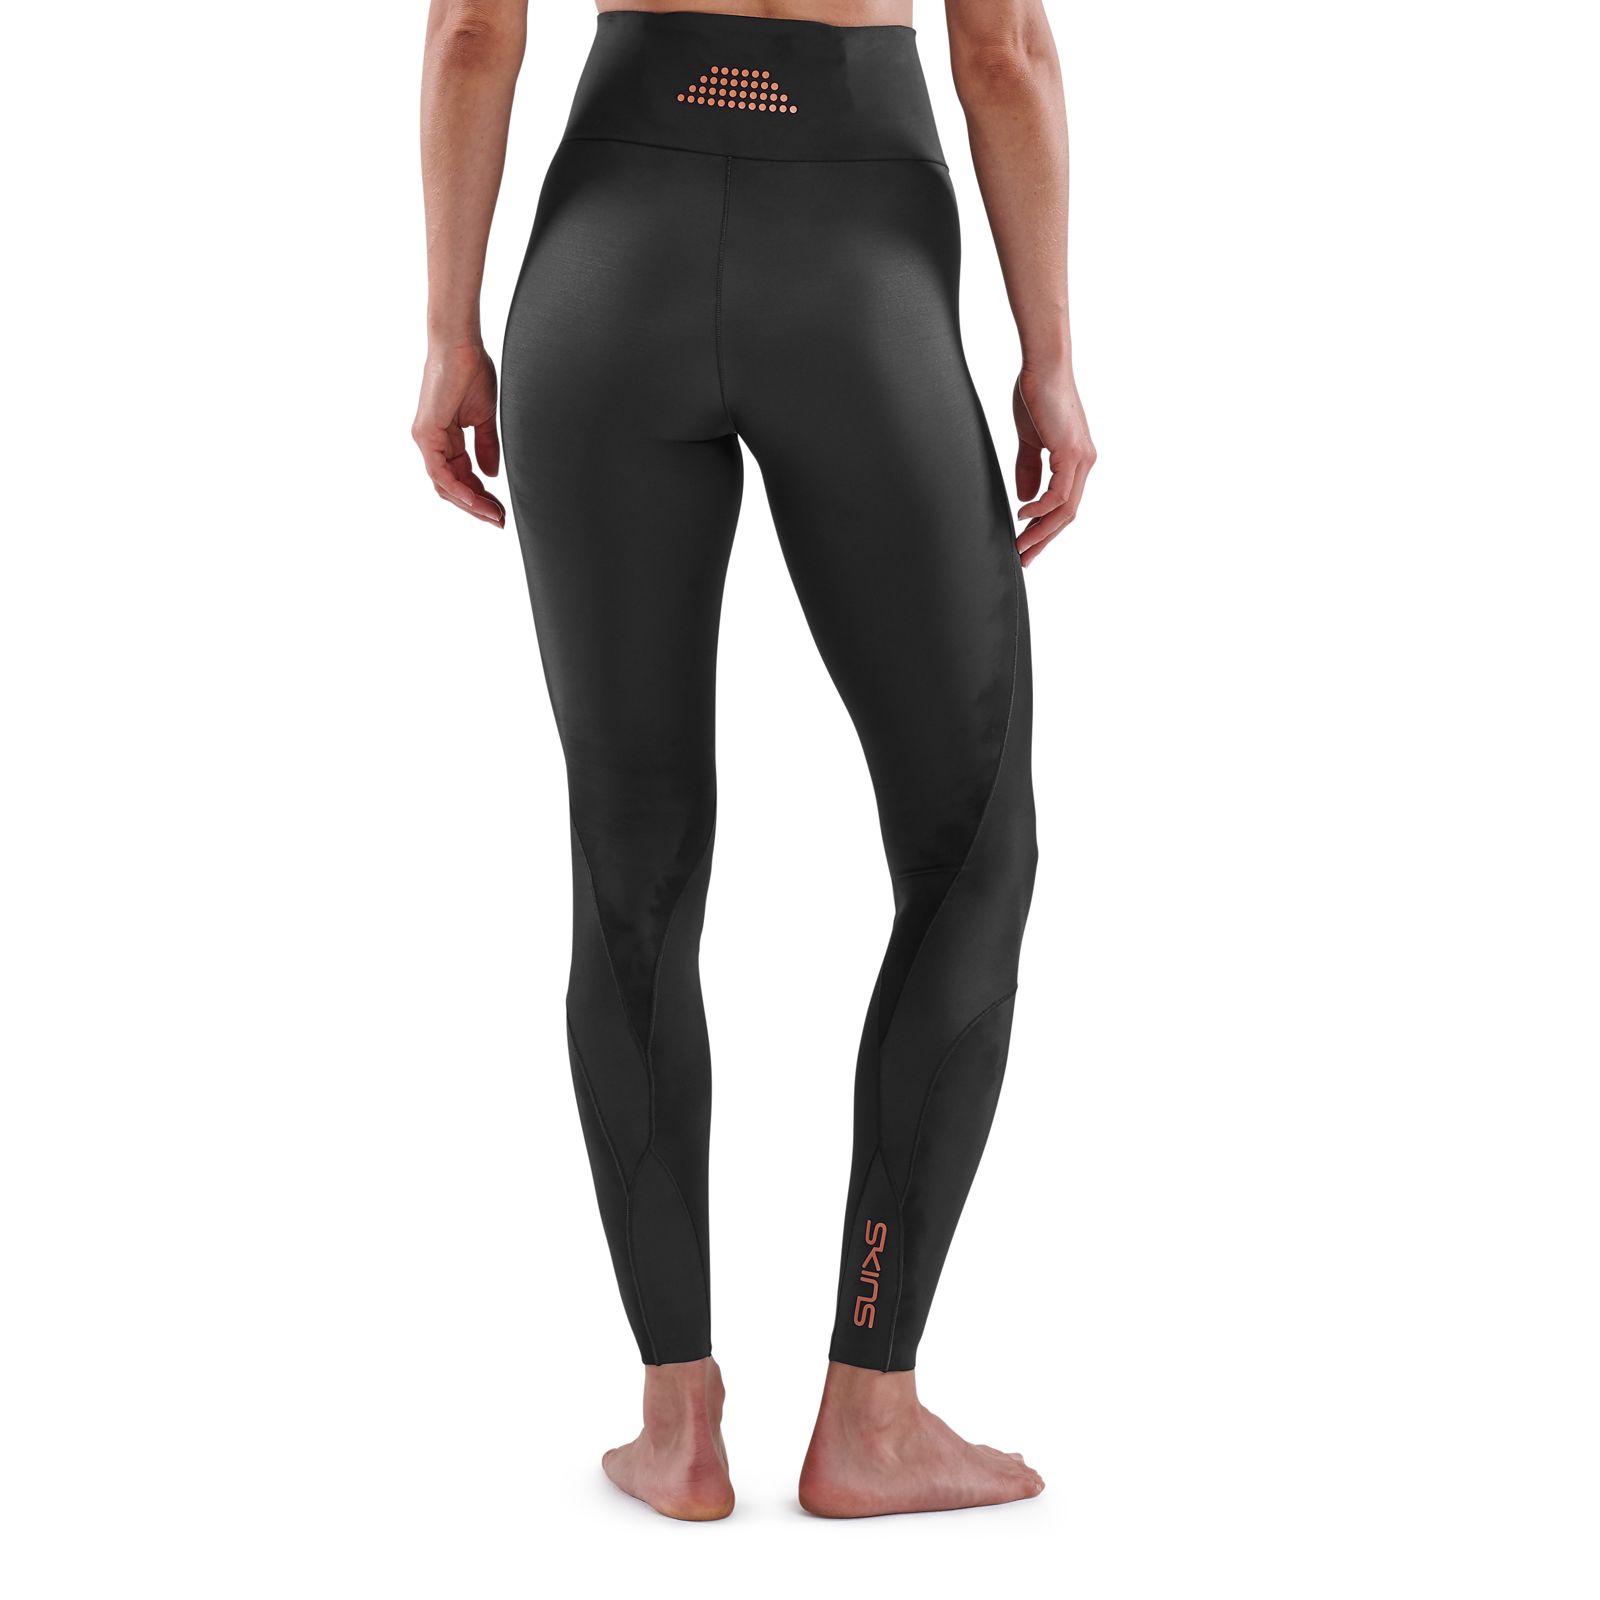 Skins A400 Women's Compression Long Tights - Black/Gold